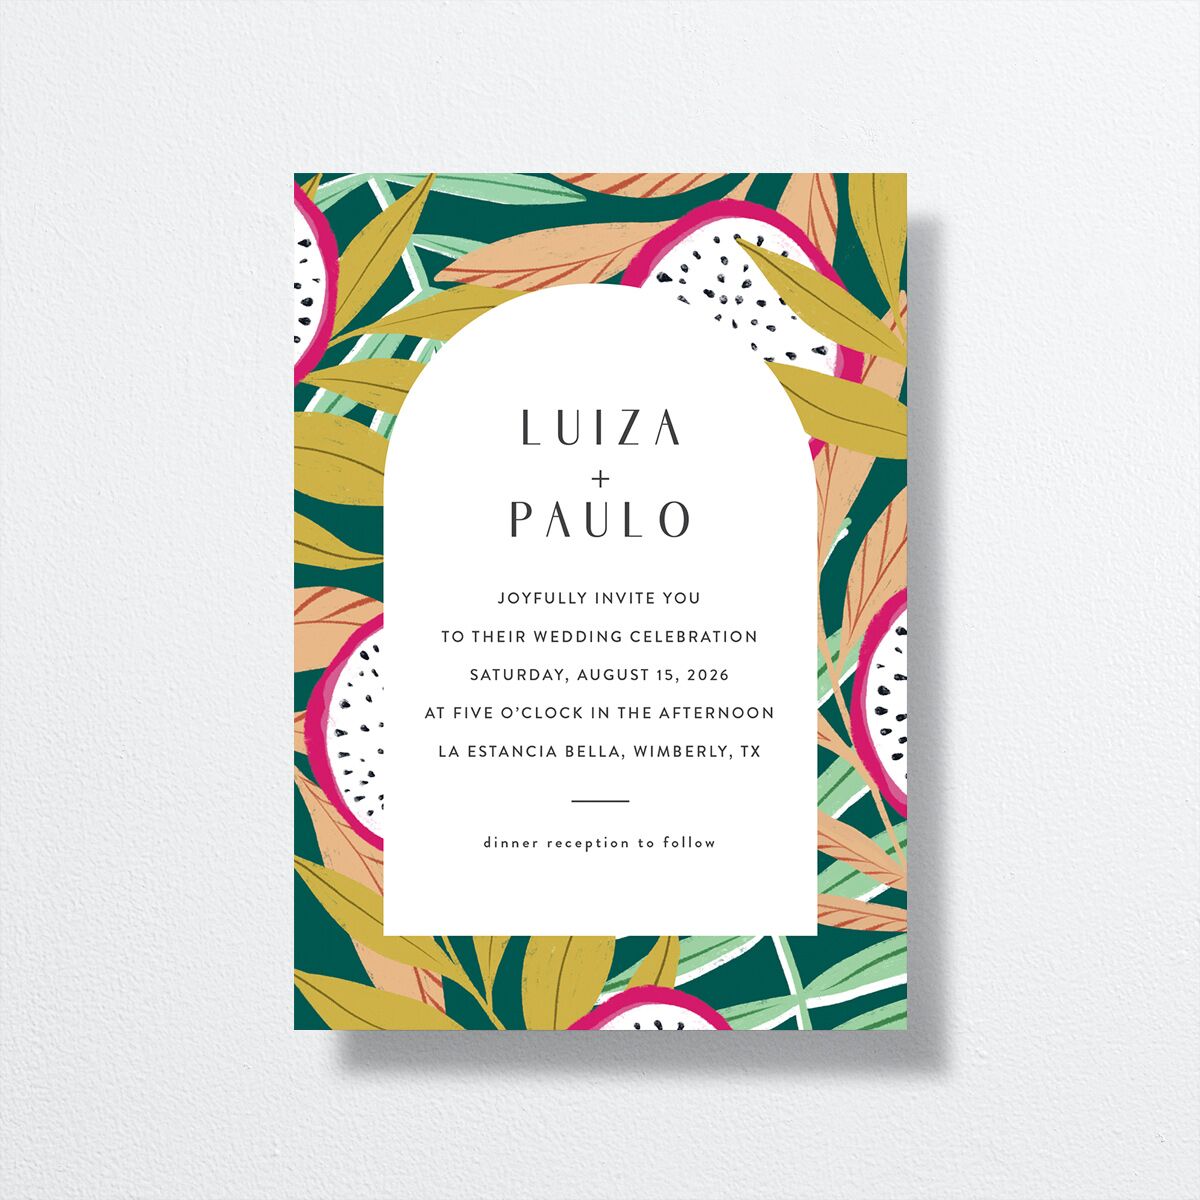 Vibrant Rio Wedding Invitations front in teal